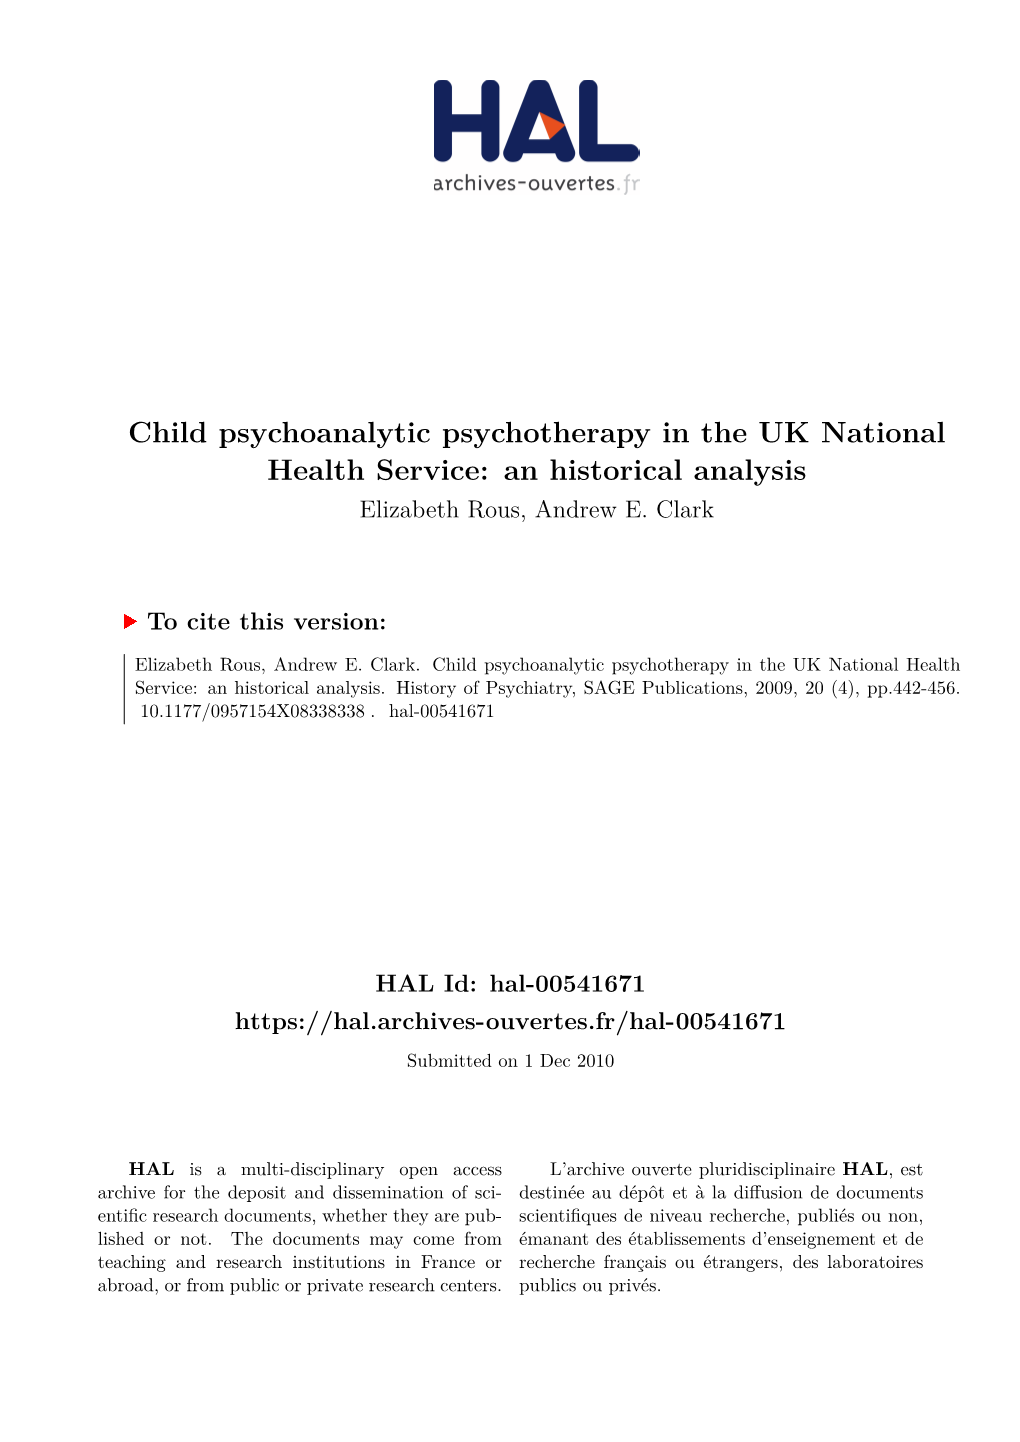 Child Psychoanalytic Psychotherapy in the UK National Health Service: an Historical Analysis Elizabeth Rous, Andrew E